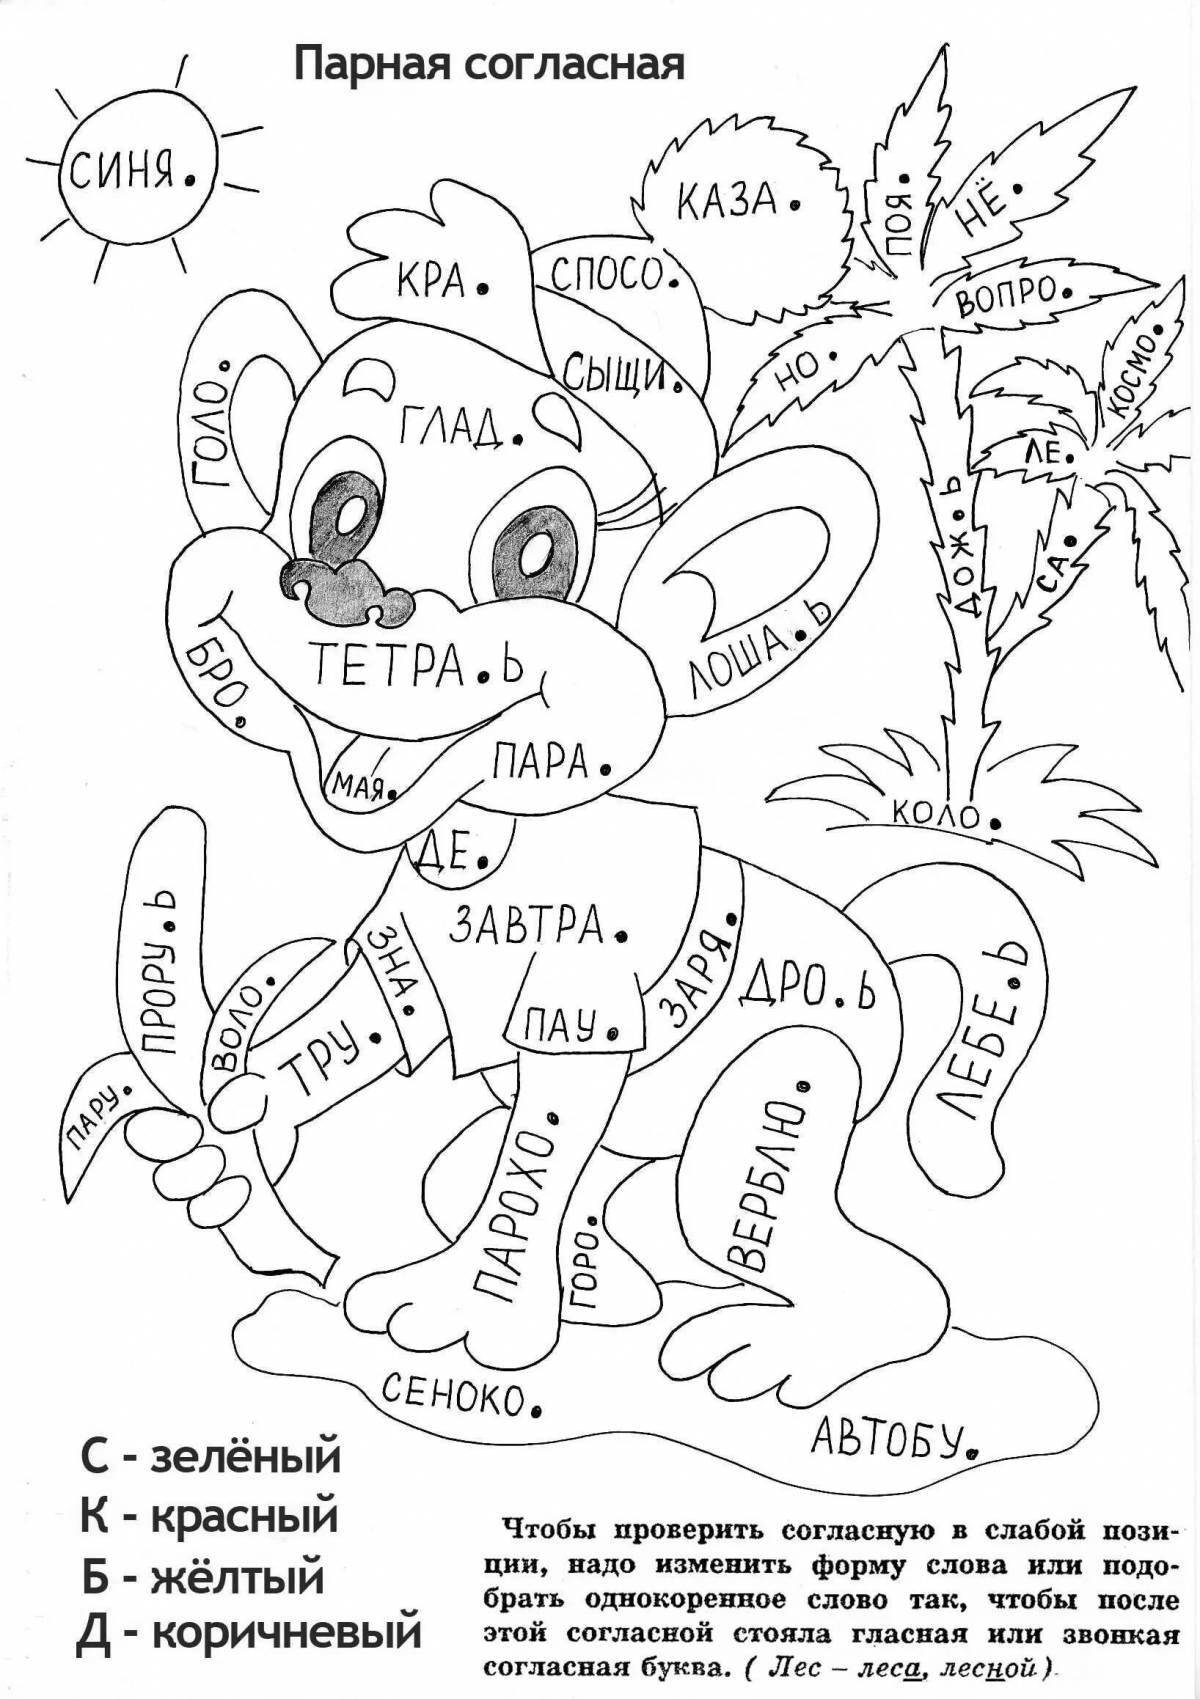 Exciting coloring in Russian language assignments for grade 3